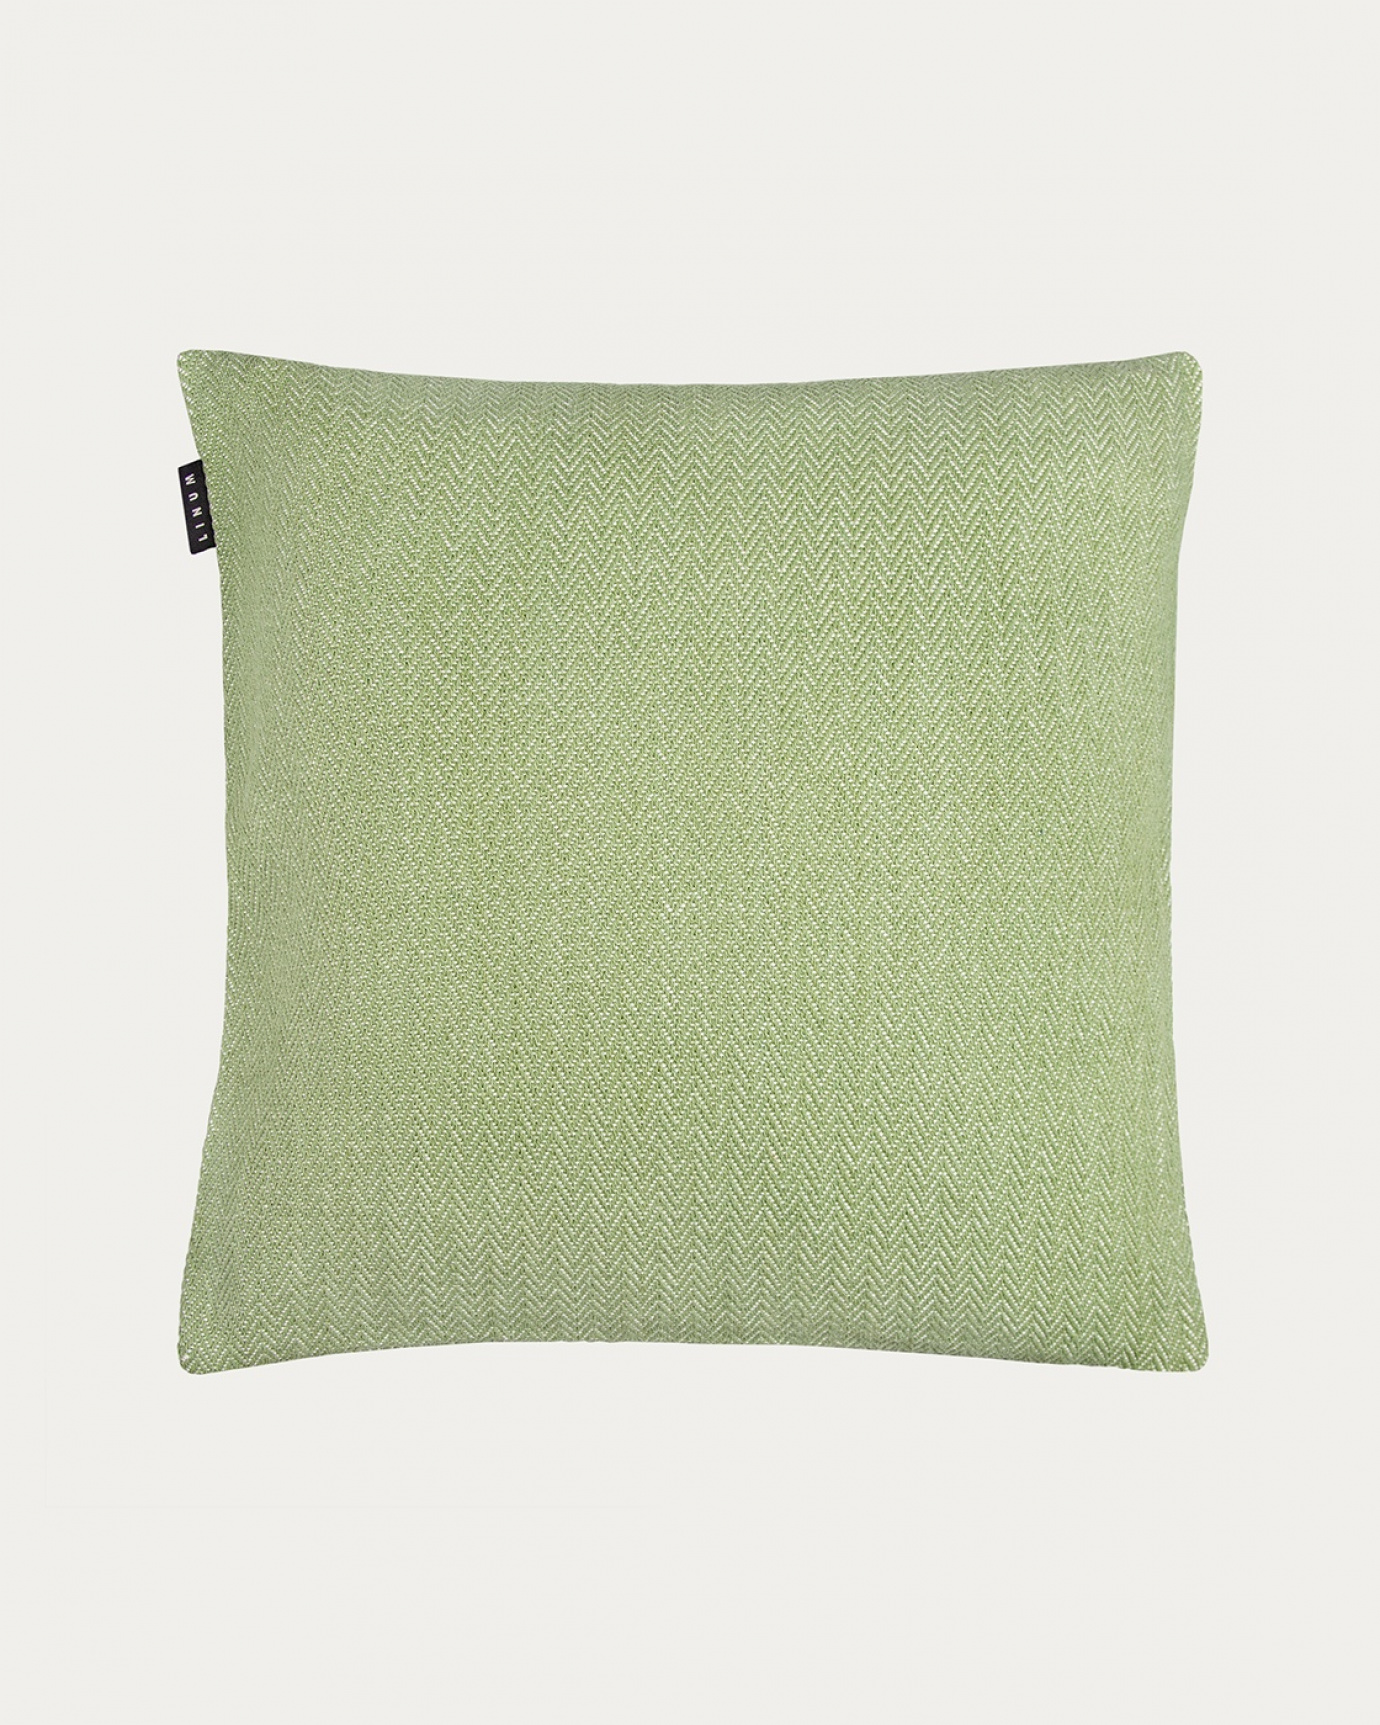 Product image moss green SHEPARD cushion cover made of soft cotton with a discreet herringbone pattern from LINUM DESIGN. Size 50x50 cm.